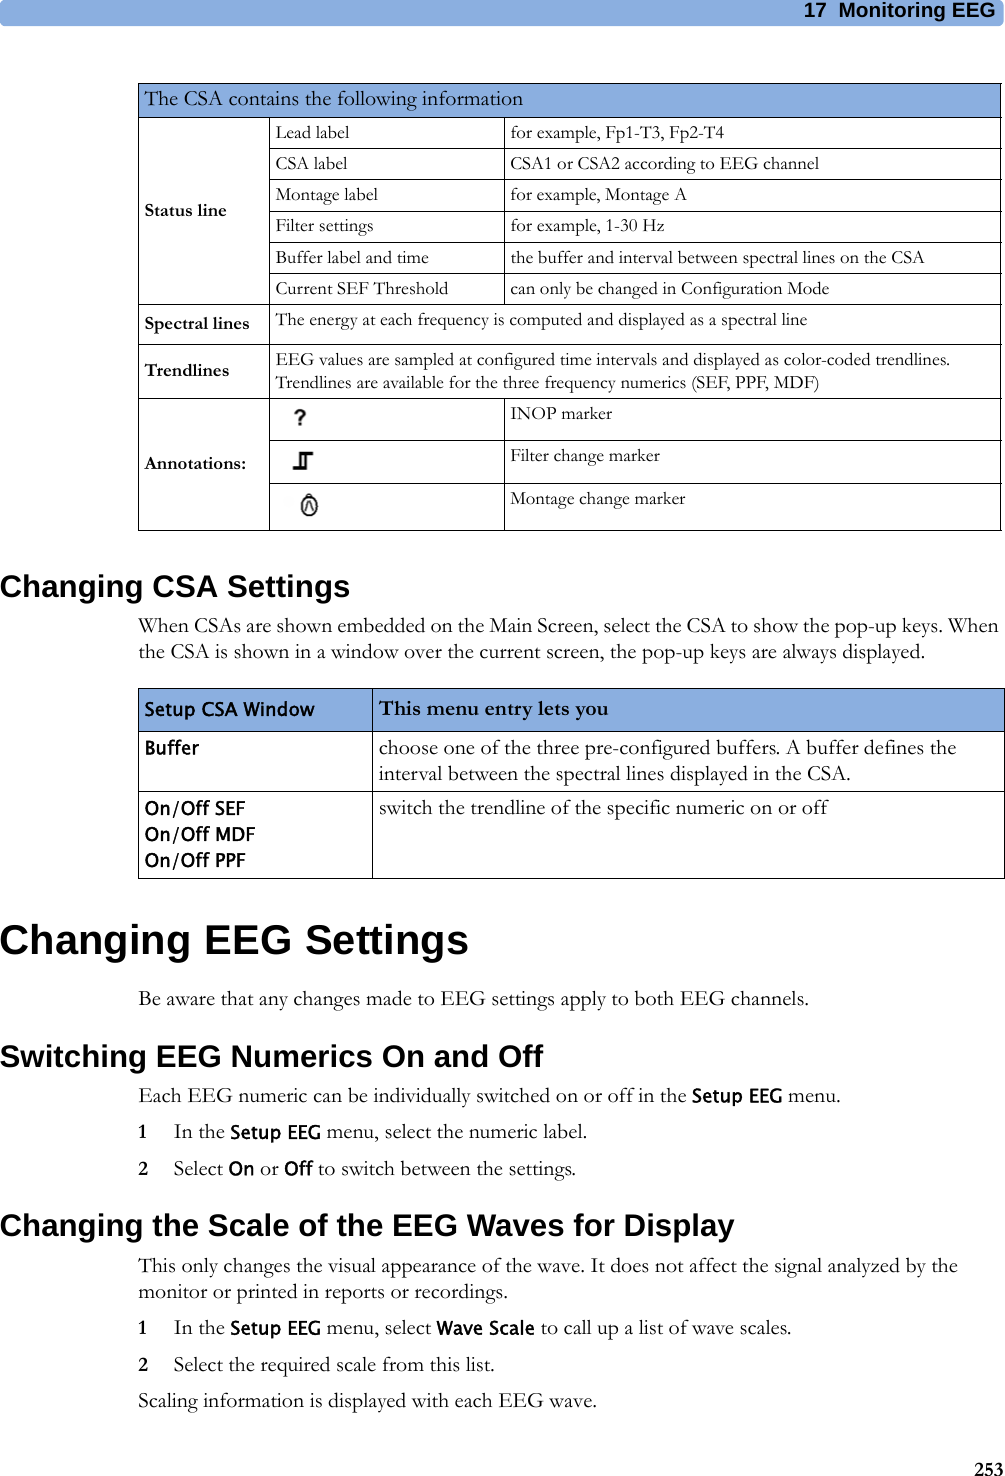 17 Monitoring EEG253Changing CSA SettingsWhen CSAs are shown embedded on the Main Screen, select the CSA to show the pop-up keys. When the CSA is shown in a window over the current screen, the pop-up keys are always displayed.Changing EEG SettingsBe aware that any changes made to EEG settings apply to both EEG channels.Switching EEG Numerics On and OffEach EEG numeric can be individually switched on or off in the Setup EEG menu.1In the Setup EEG menu, select the numeric label.2Select On or Off to switch between the settings.Changing the Scale of the EEG Waves for DisplayThis only changes the visual appearance of the wave. It does not affect the signal analyzed by the monitor or printed in reports or recordings.1In the Setup EEG menu, select Wave Scale to call up a list of wave scales.2Select the required scale from this list.Scaling information is displayed with each EEG wave.The CSA contains the following informationStatus lineLead label for example, Fp1-T3, Fp2-T4CSA label CSA1 or CSA2 according to EEG channelMontage label for example, Montage AFilter settings for example, 1-30 HzBuffer label and time the buffer and interval between spectral lines on the CSACurrent SEF Threshold can only be changed in Configuration ModeSpectral lines The energy at each frequency is computed and displayed as a spectral lineTrendlines EEG values are sampled at configured time intervals and displayed as color-coded trendlines. Trendlines are available for the three frequency numerics (SEF, PPF, MDF)Annotations:INOP markerFilter change markerMontage change markerSetup CSA Window This menu entry lets youBuffer choose one of the three pre-configured buffers. A buffer defines the interval between the spectral lines displayed in the CSA. On/Off SEFOn/Off MDFOn/Off PPFswitch the trendline of the specific numeric on or off